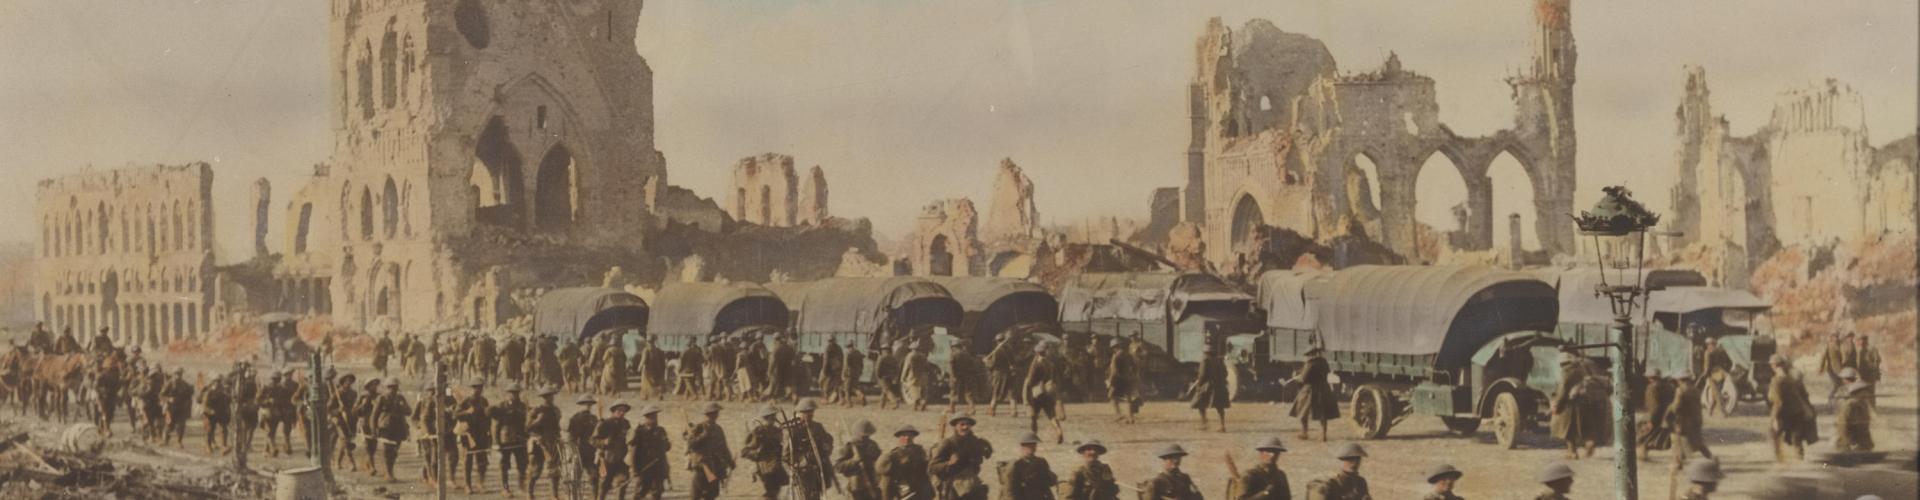 A hand coloured photograph of soldiers filing past the ruins of grand buildings.